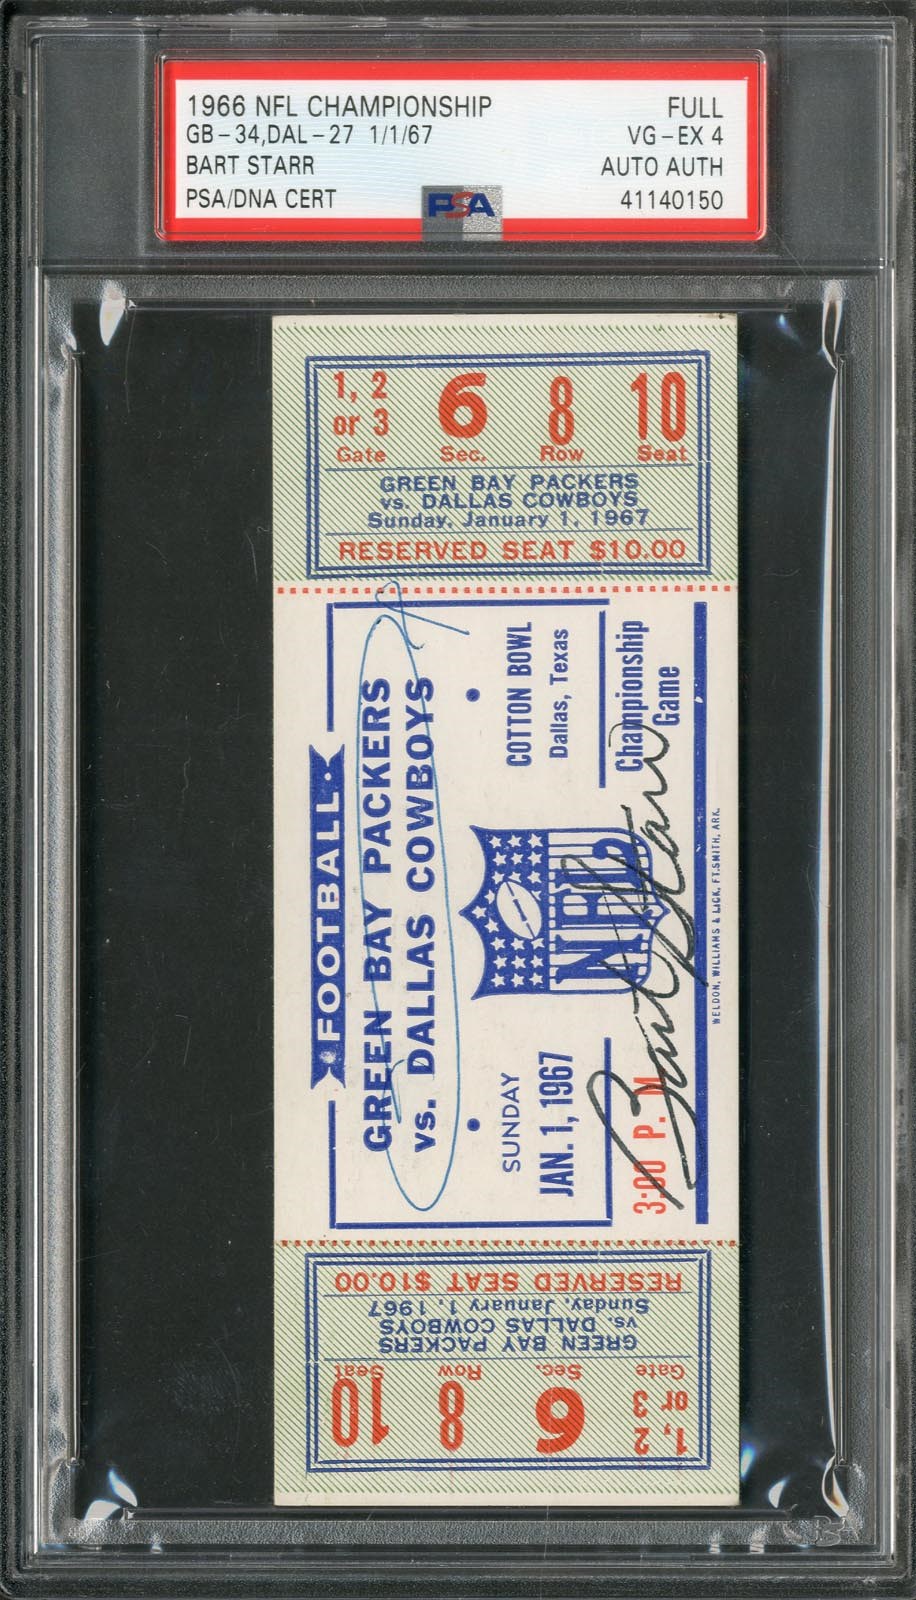 - 1966 NFL Championship Full Ticket Signed by Bart Starr (PSA)